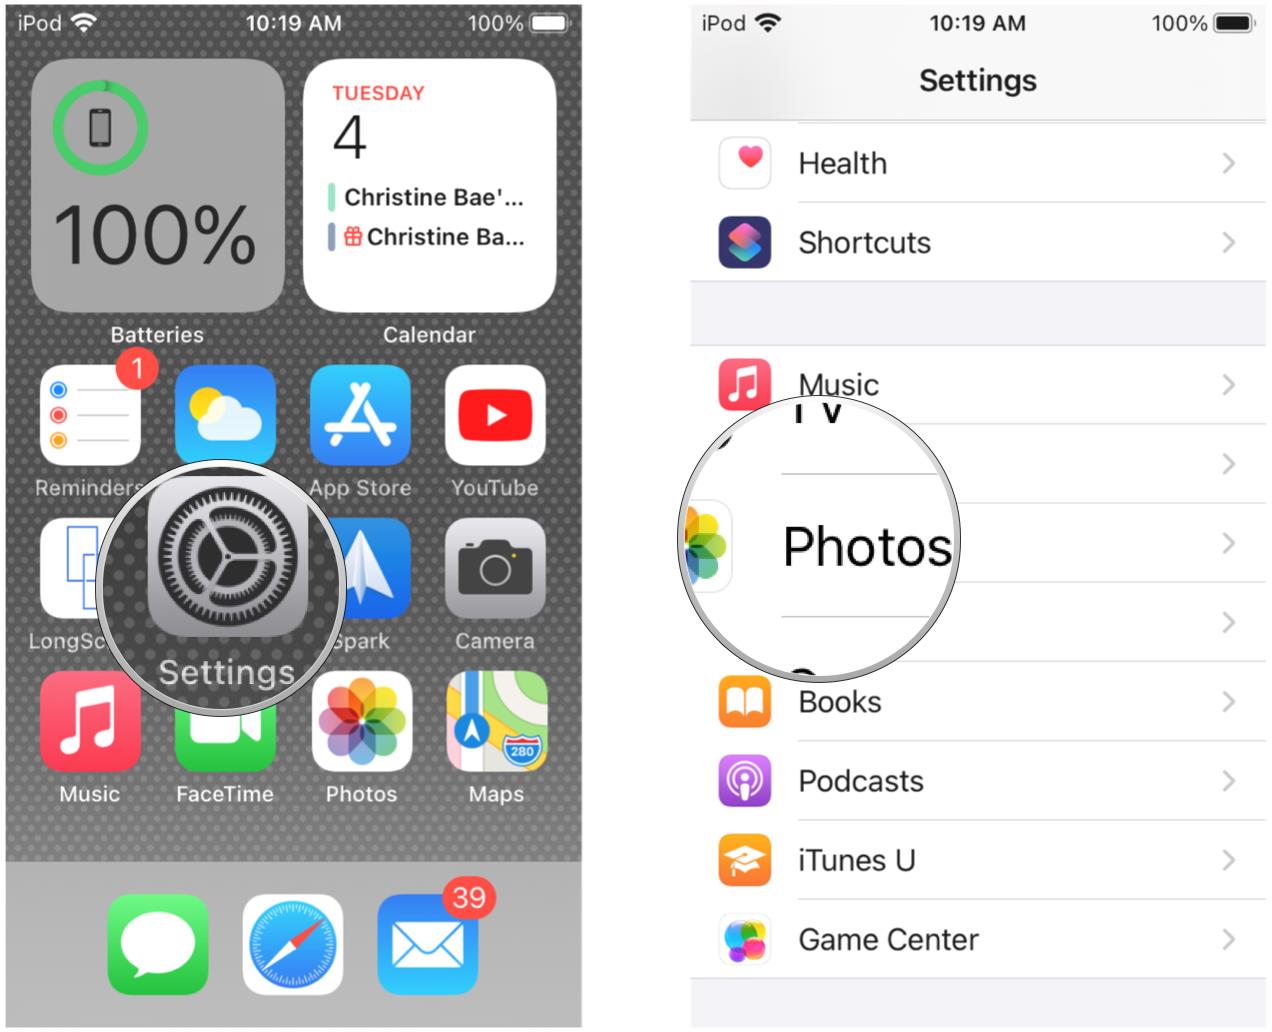 Enable iCloud Photo Library on your iPhone or iPad by showing steps: Launch Settings, tap Photos